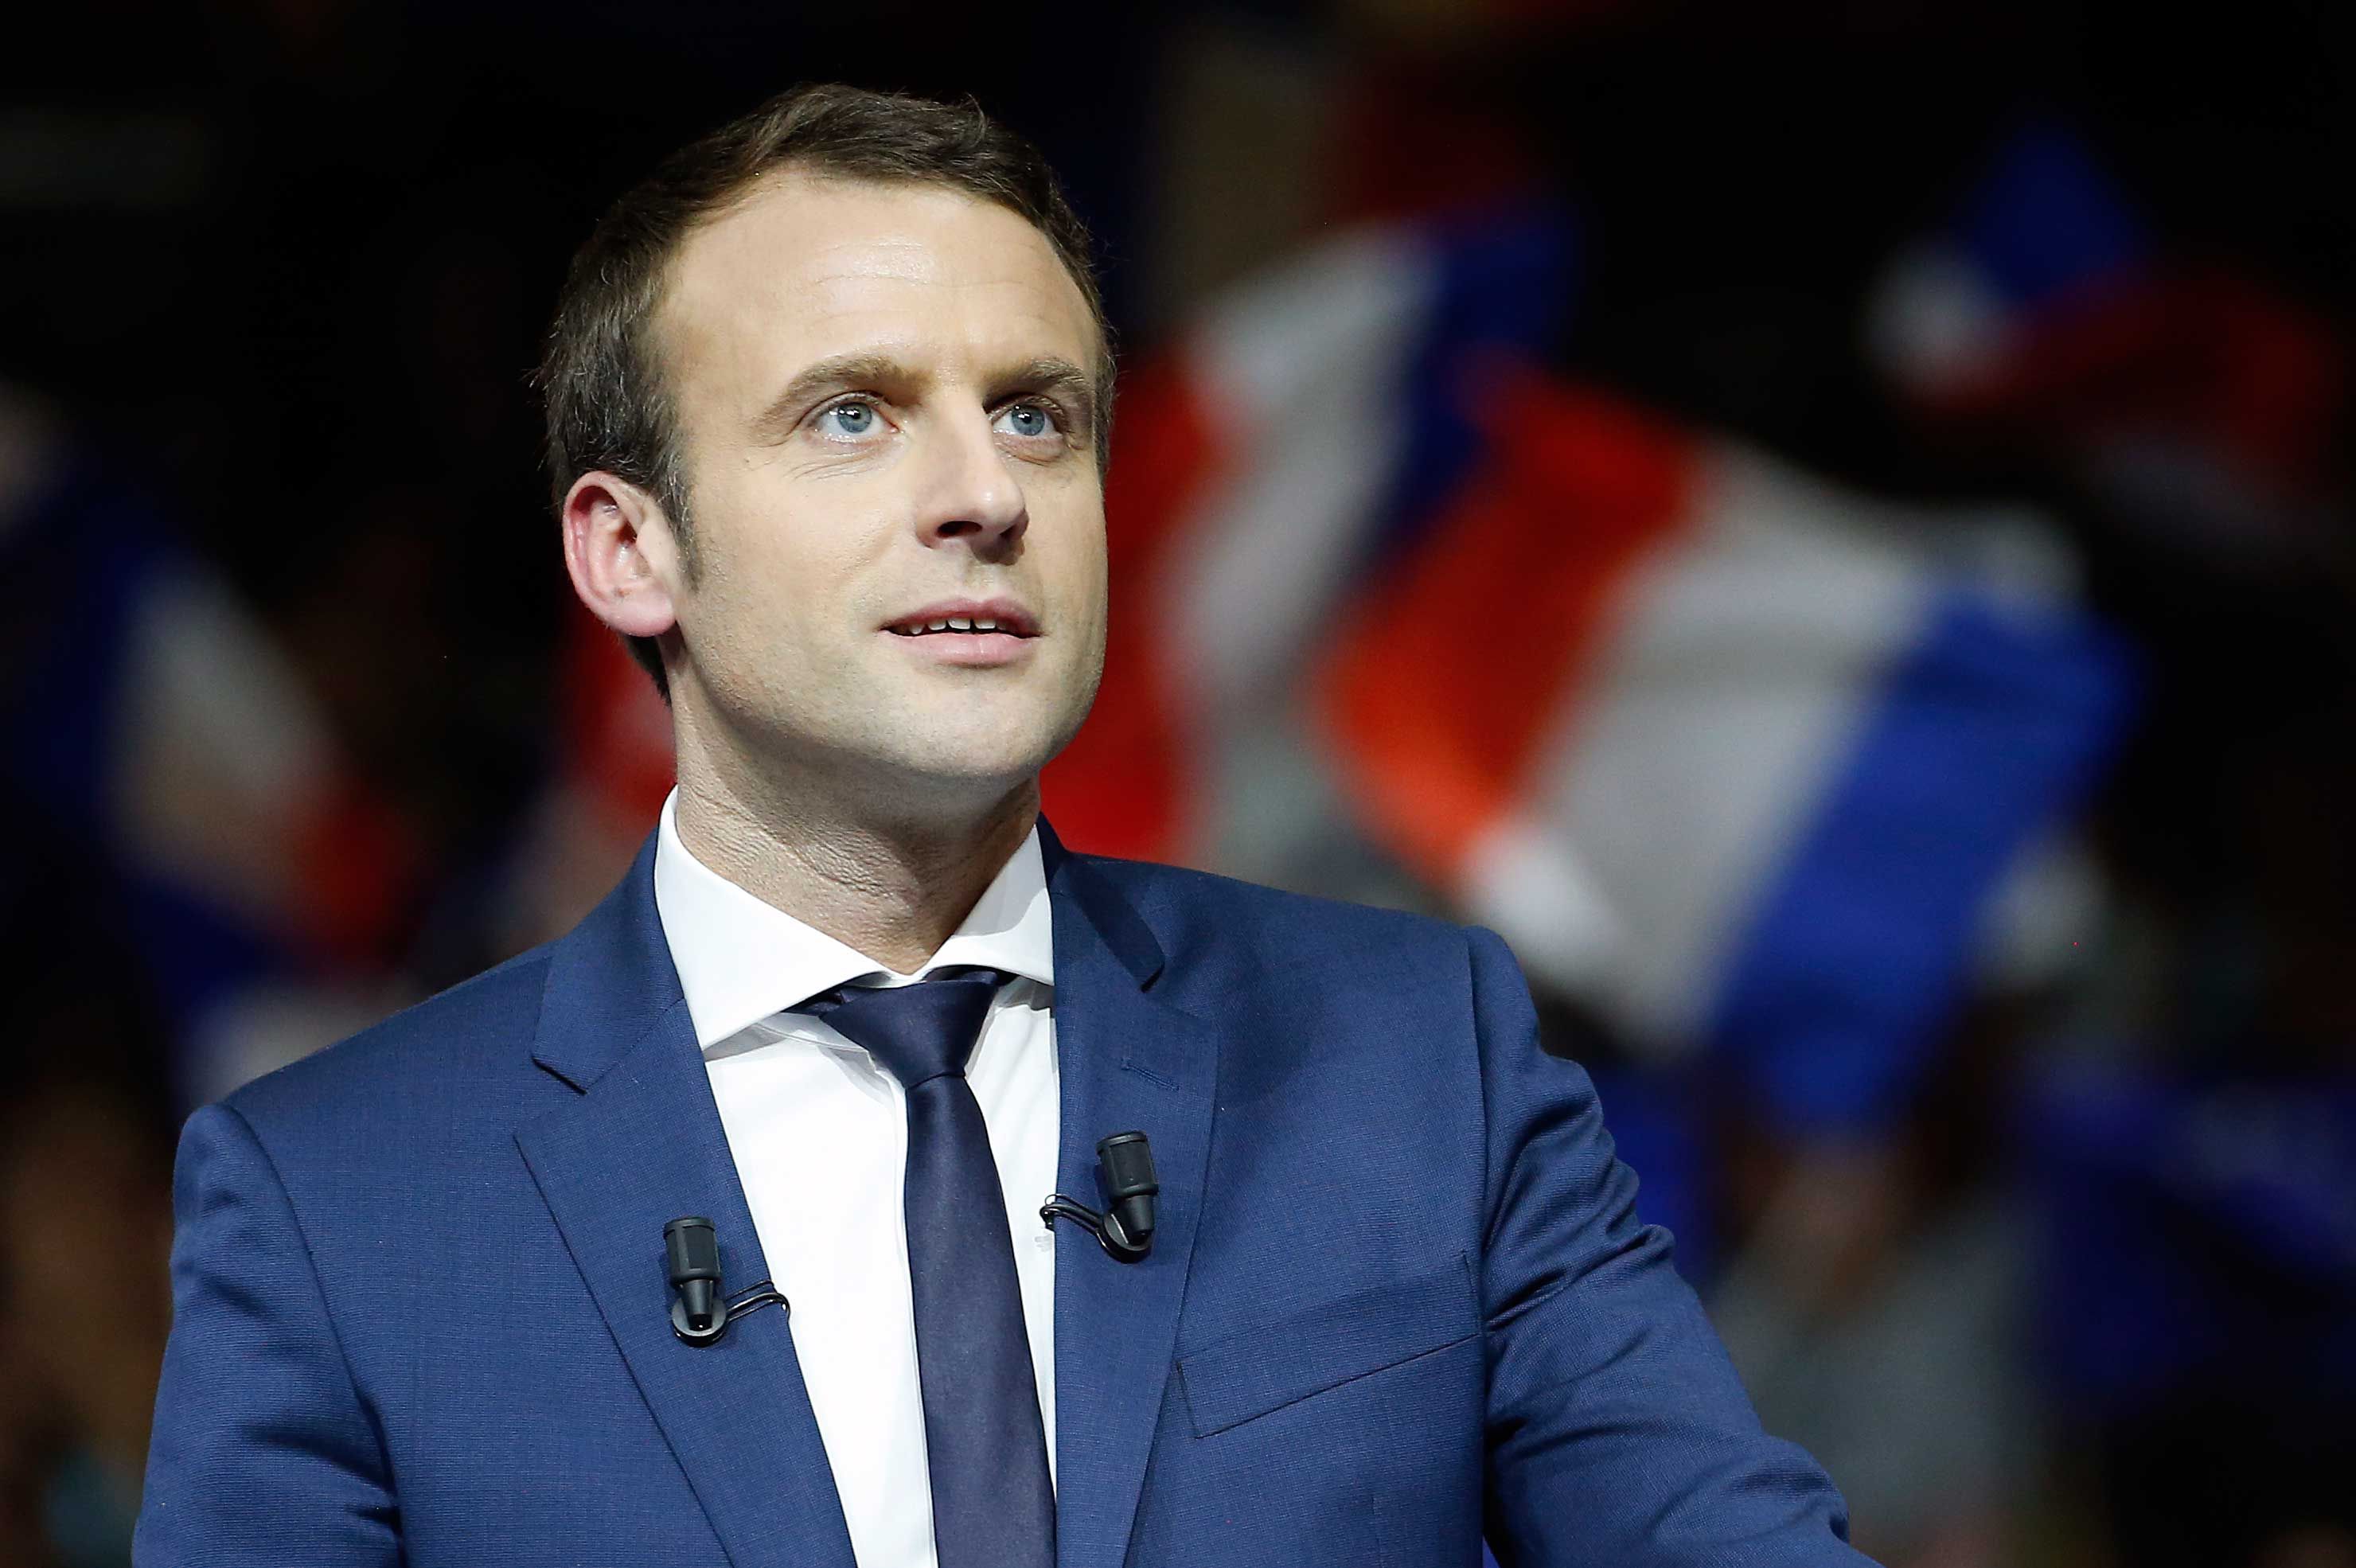 Emmanuel Macron Height, Weight, Age, Biography, Wife, Affairs, Family, Facts & More